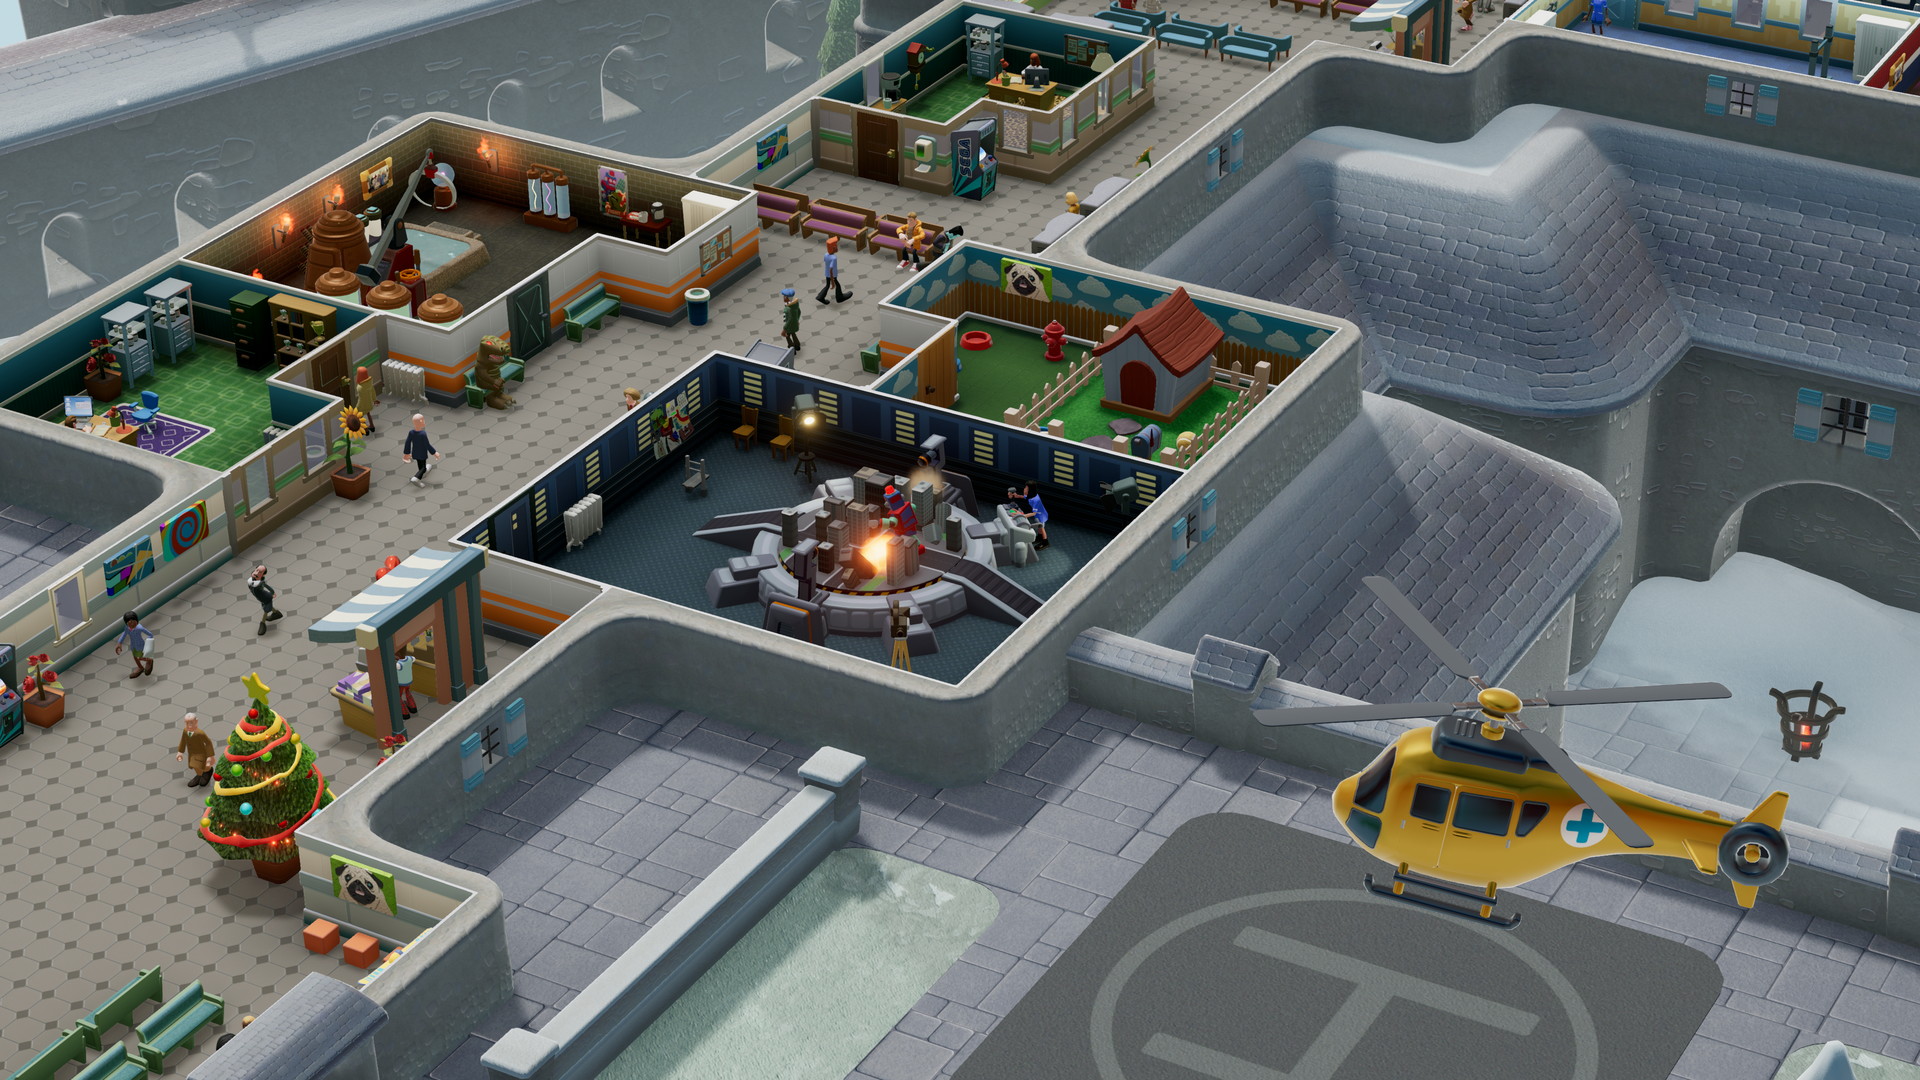 download free two point hospital bigfoot